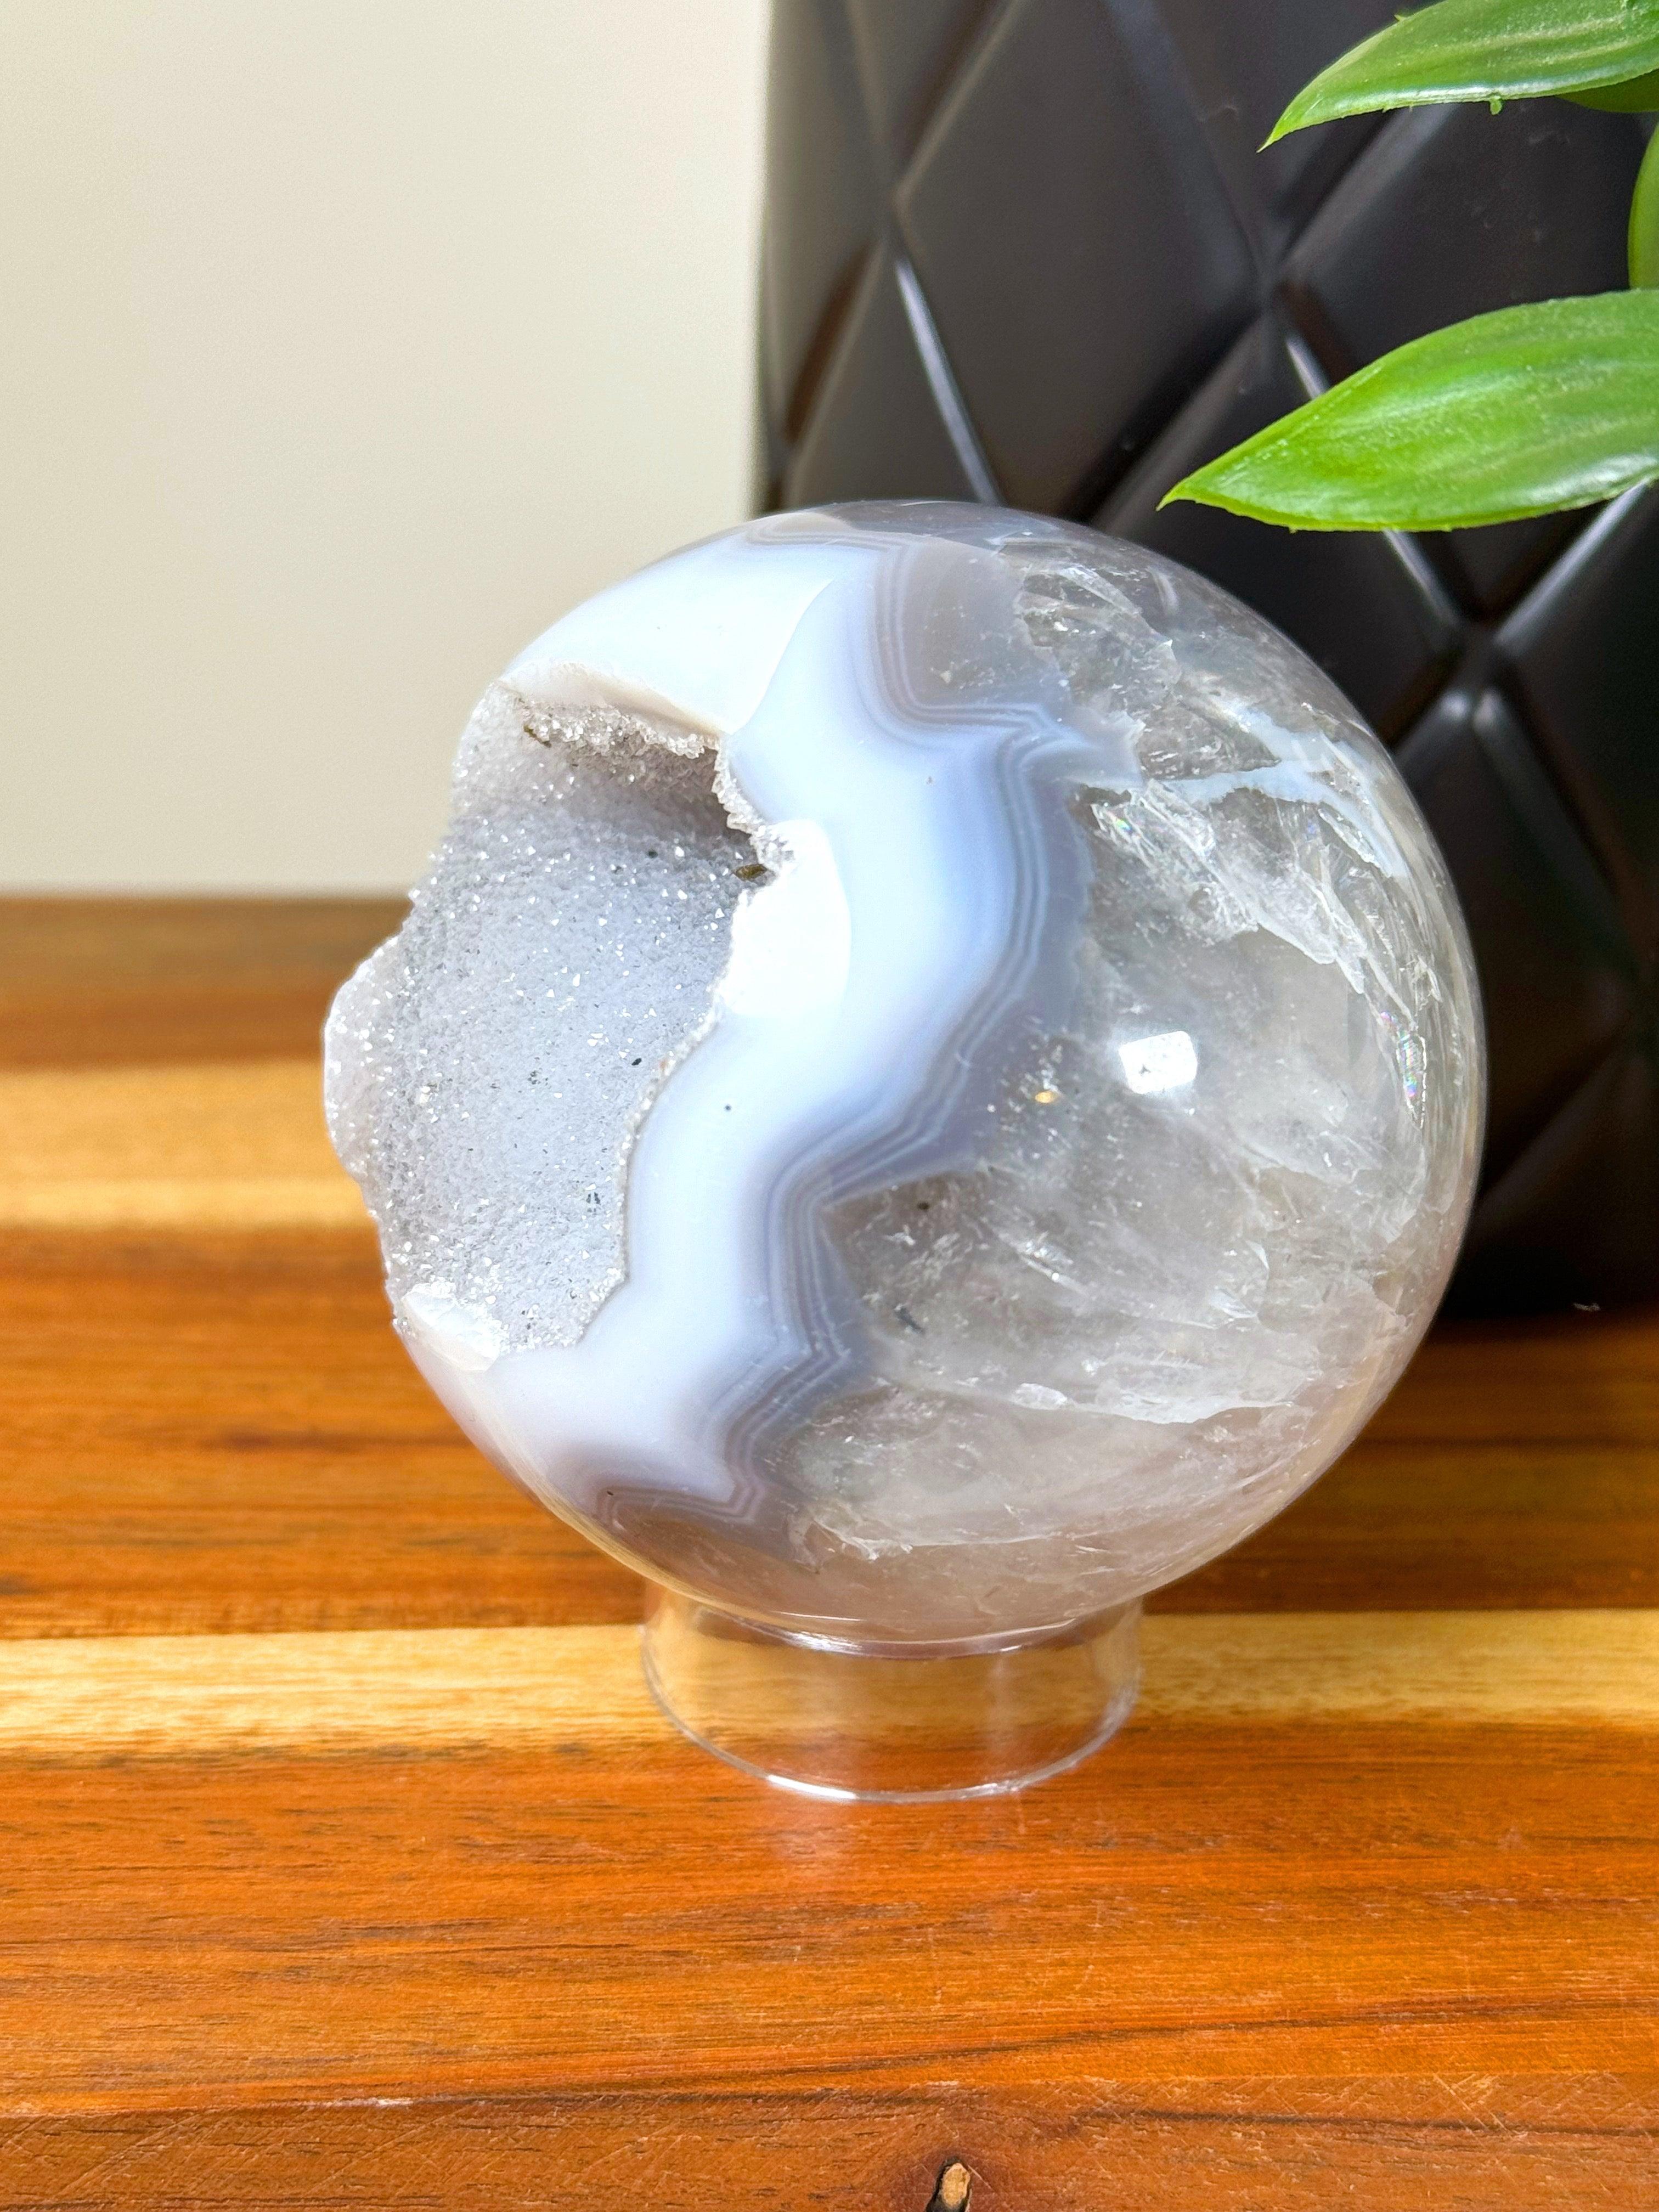 DRUZY AGATE SPHERE 13 - agate, druzy agate, googly agate, googly eye, googly eye agate, one of a kind, sphere, statement piece - The Mineral Maven